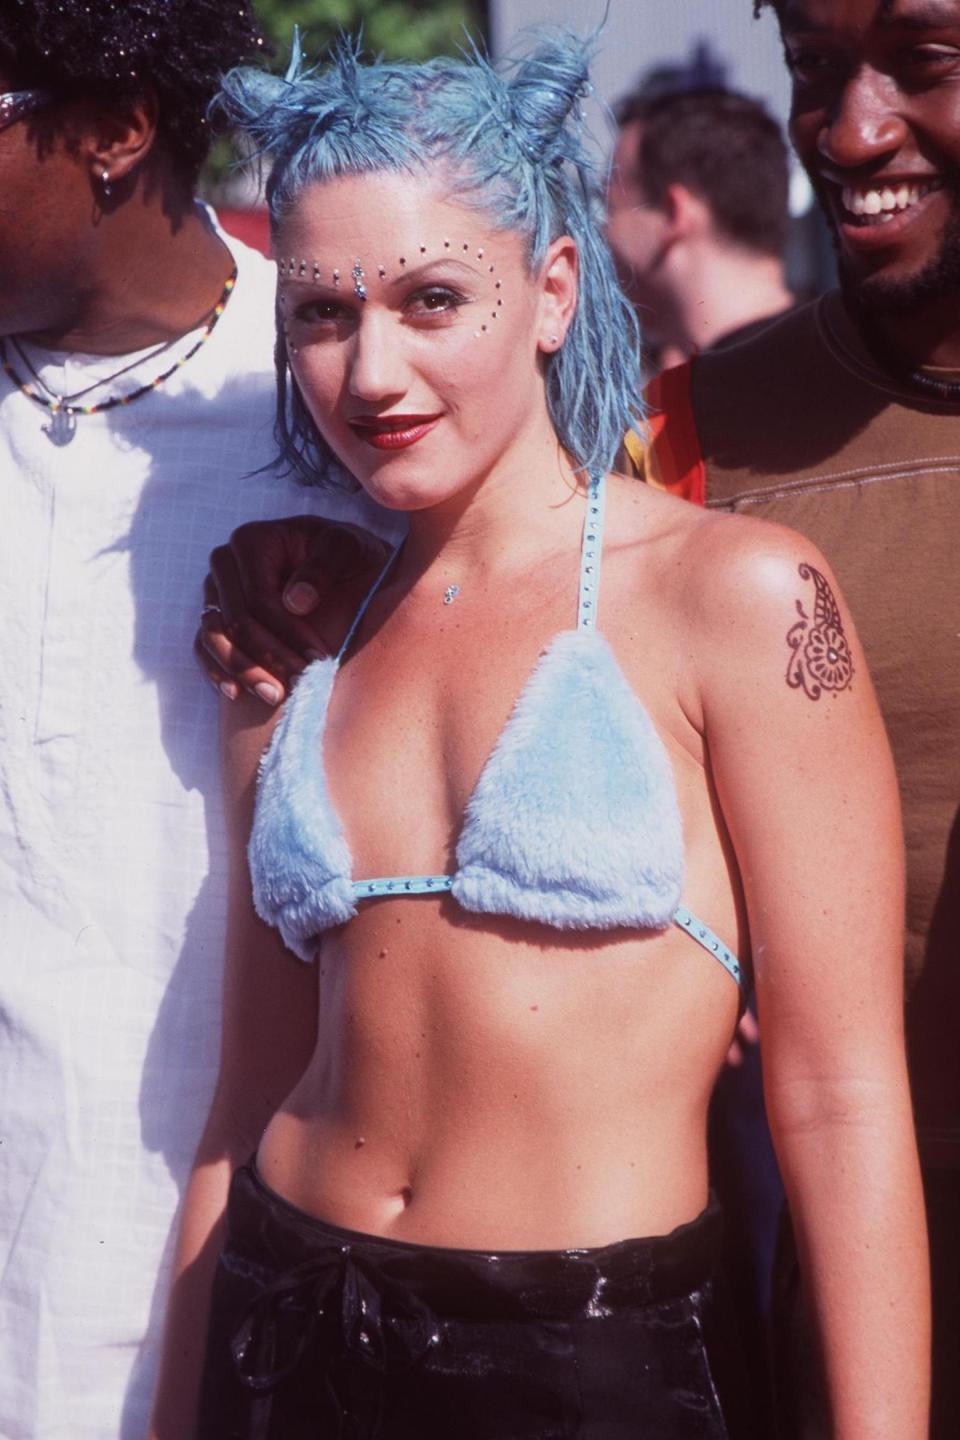 Gwen Stefani attends the MTV Awards in 1998 in Universal City, CA, USA. (Hulton Archive/Getty Images)